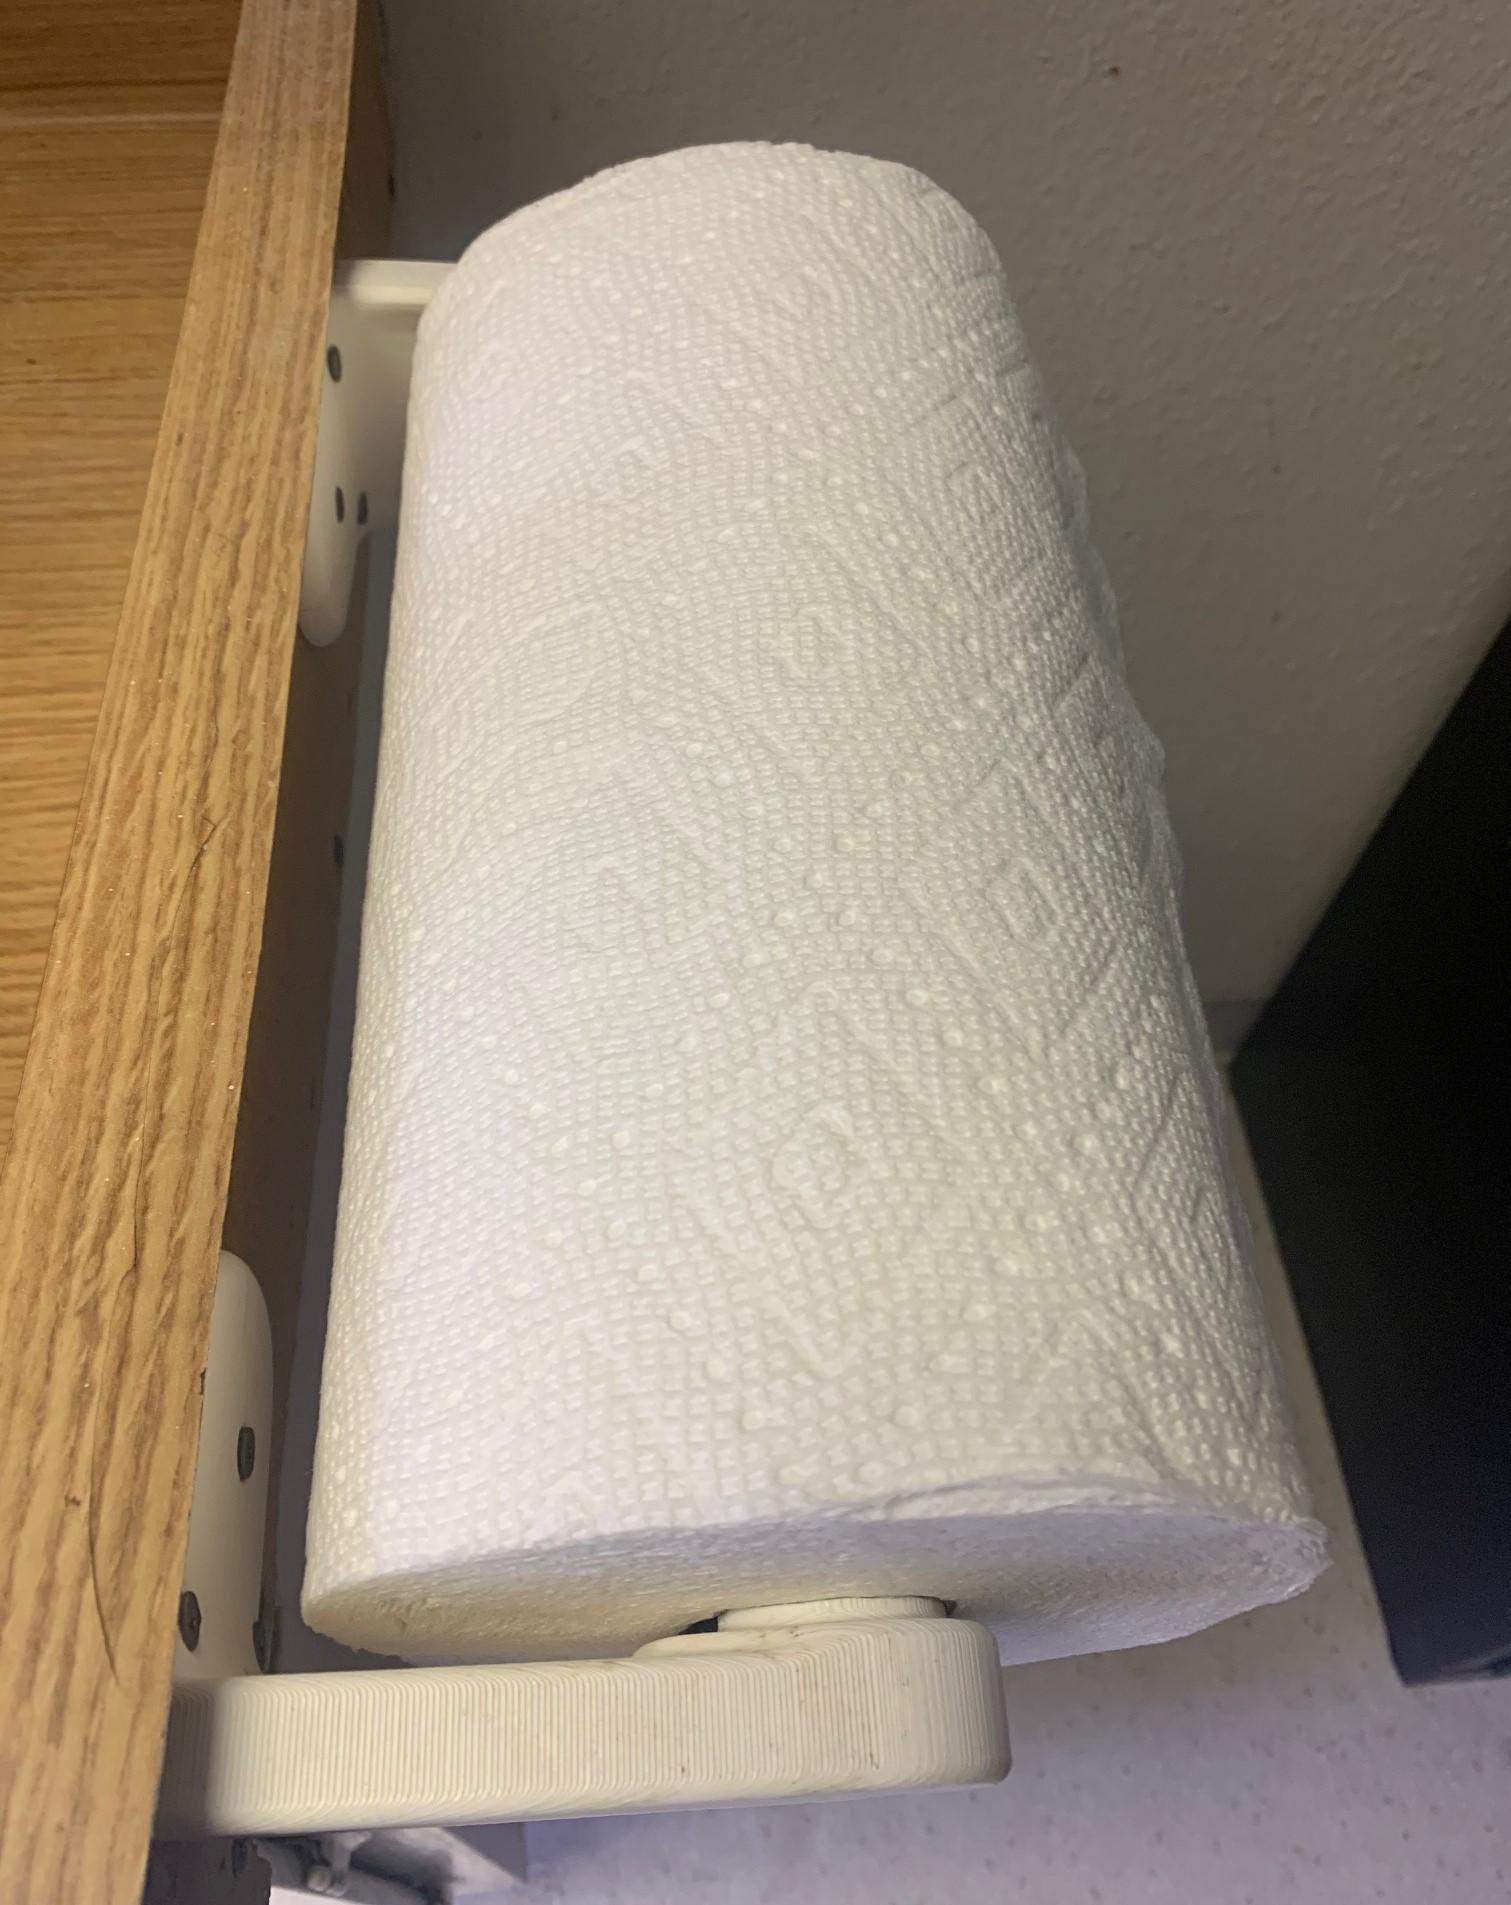 New Ribbed Universal Paper Towel Mount.step 3d model